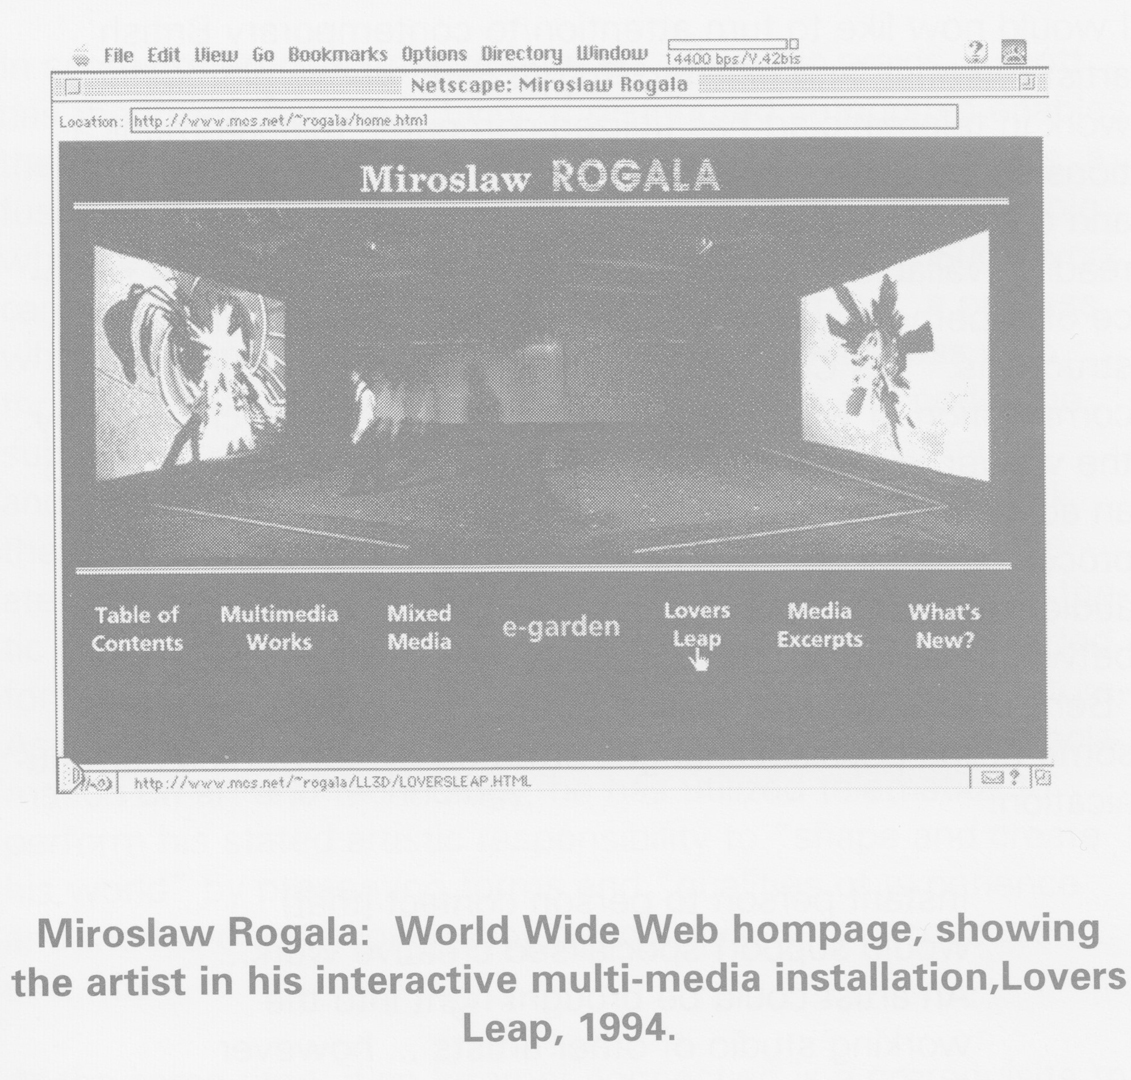 ©ISEA96: Seventh International Symposium on Electronic Art, Edward A. Shanken, Virtual Perspective and the Artistic Vision: A Genealogy of Technology, Perception and Power